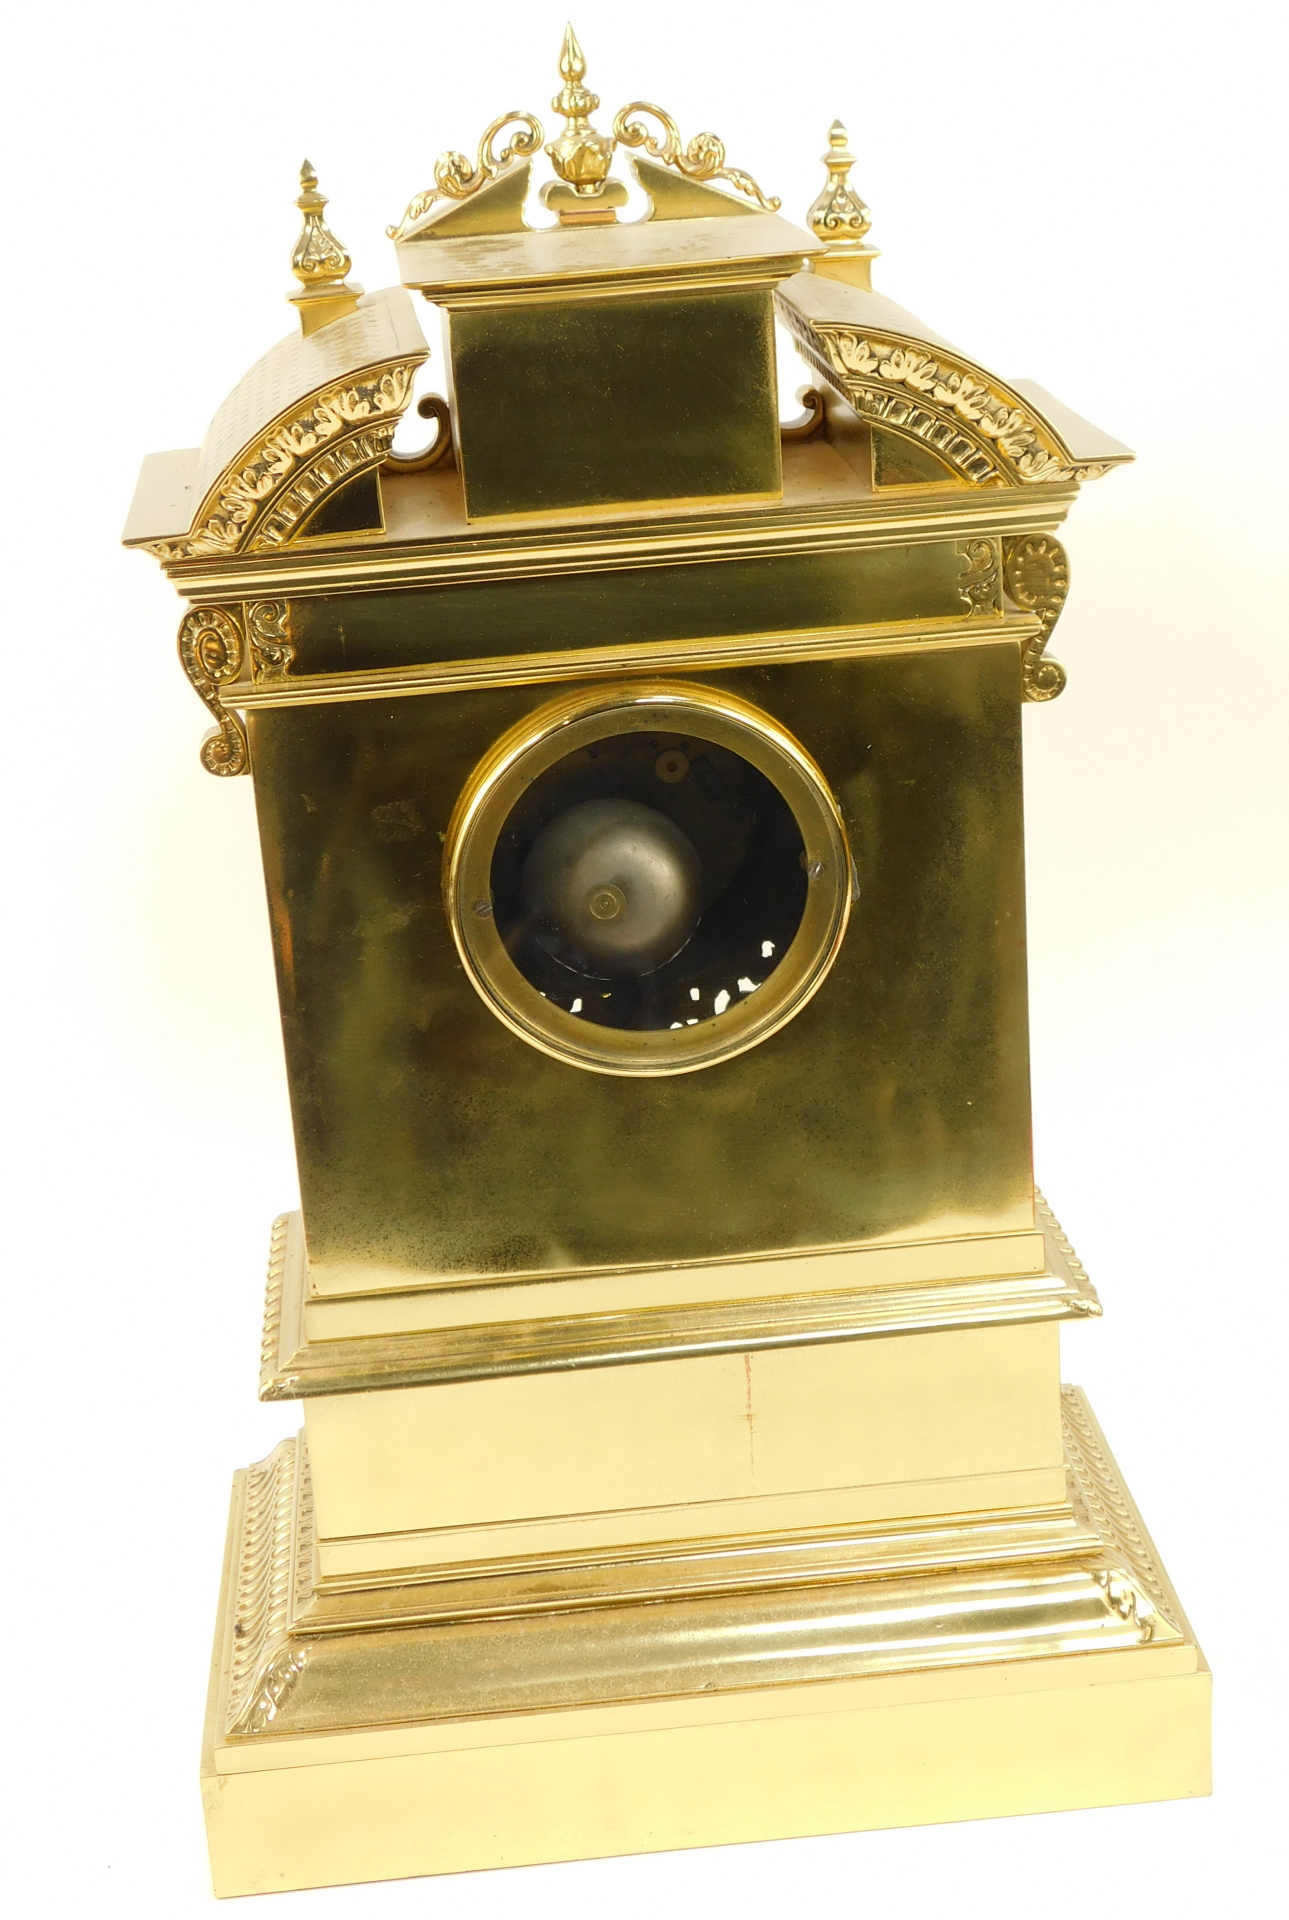 A French gilt brass mantel clock, the case decorated with swags, pillars and cherubs, above circular - Image 3 of 4